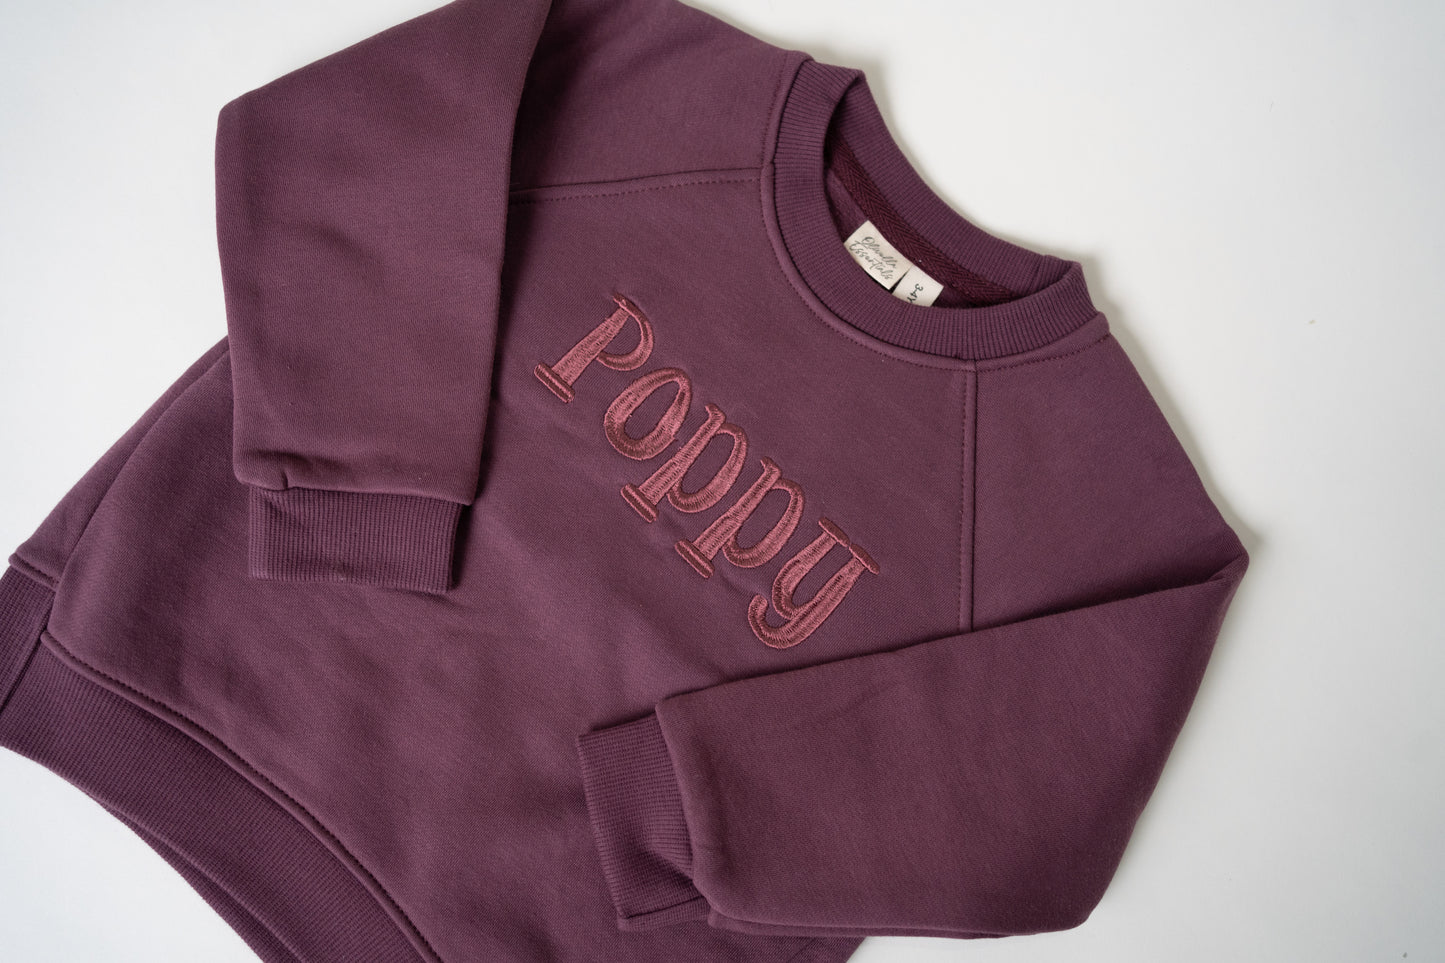 Embroidered Relaxed Sweatshirt Kids | Plum